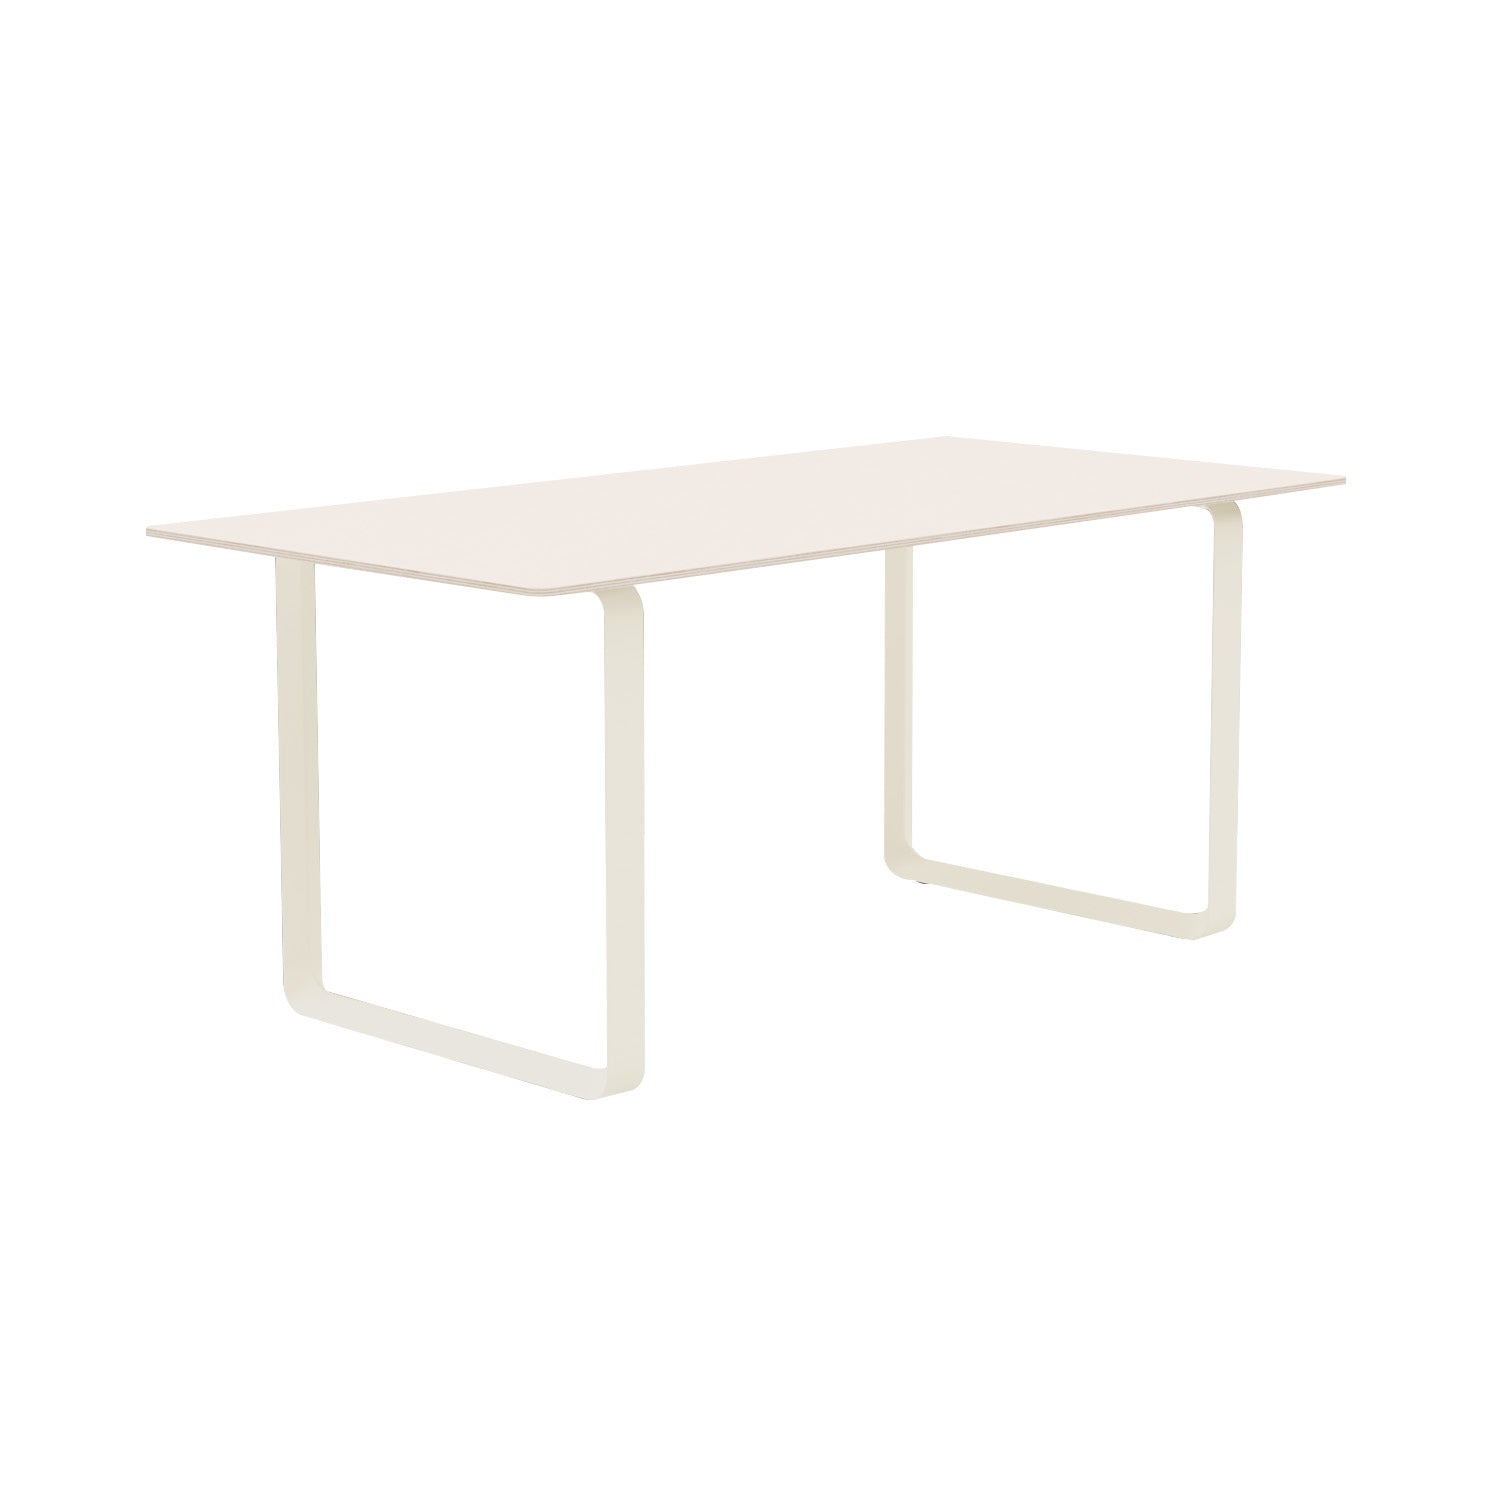 70/70 Table: Small + Sand Laminate + Sand